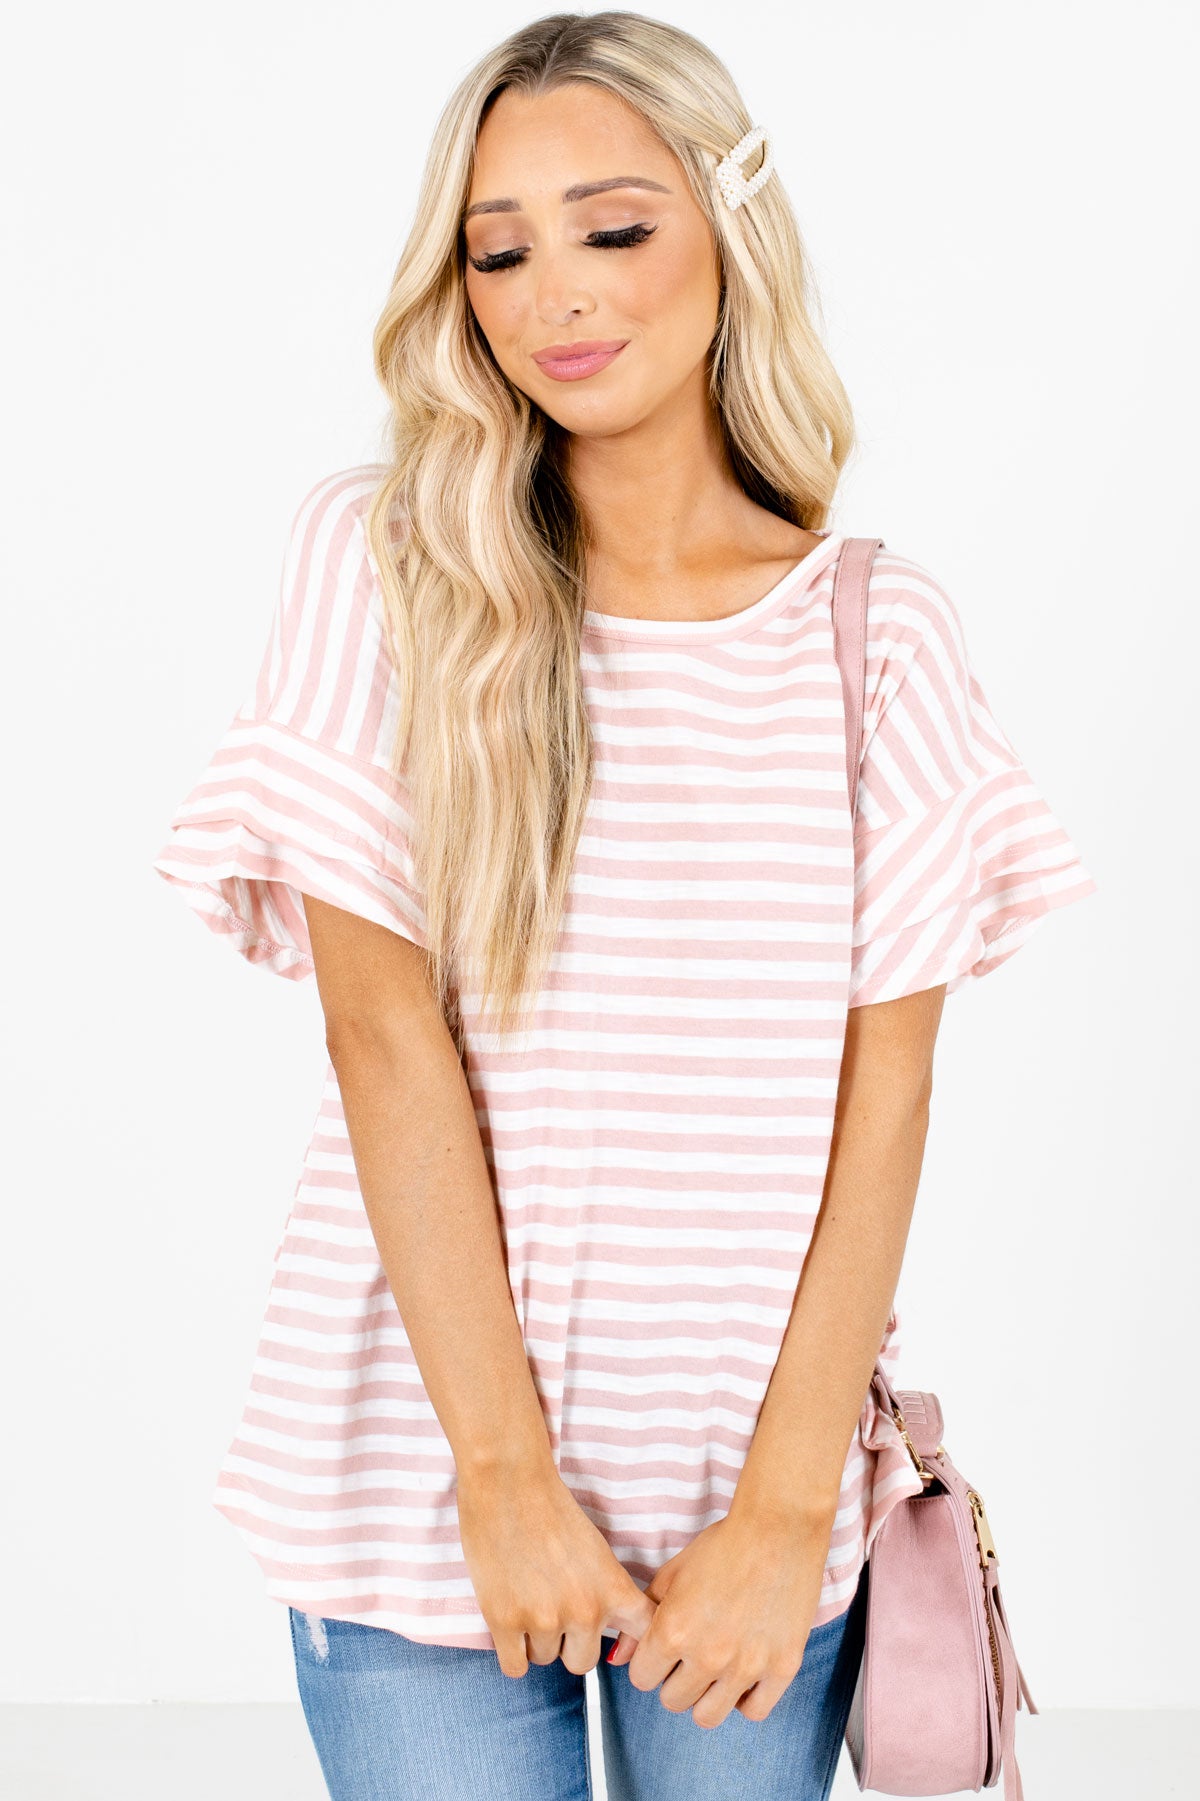 Pink Striped Patterned Boutique Tops for Women